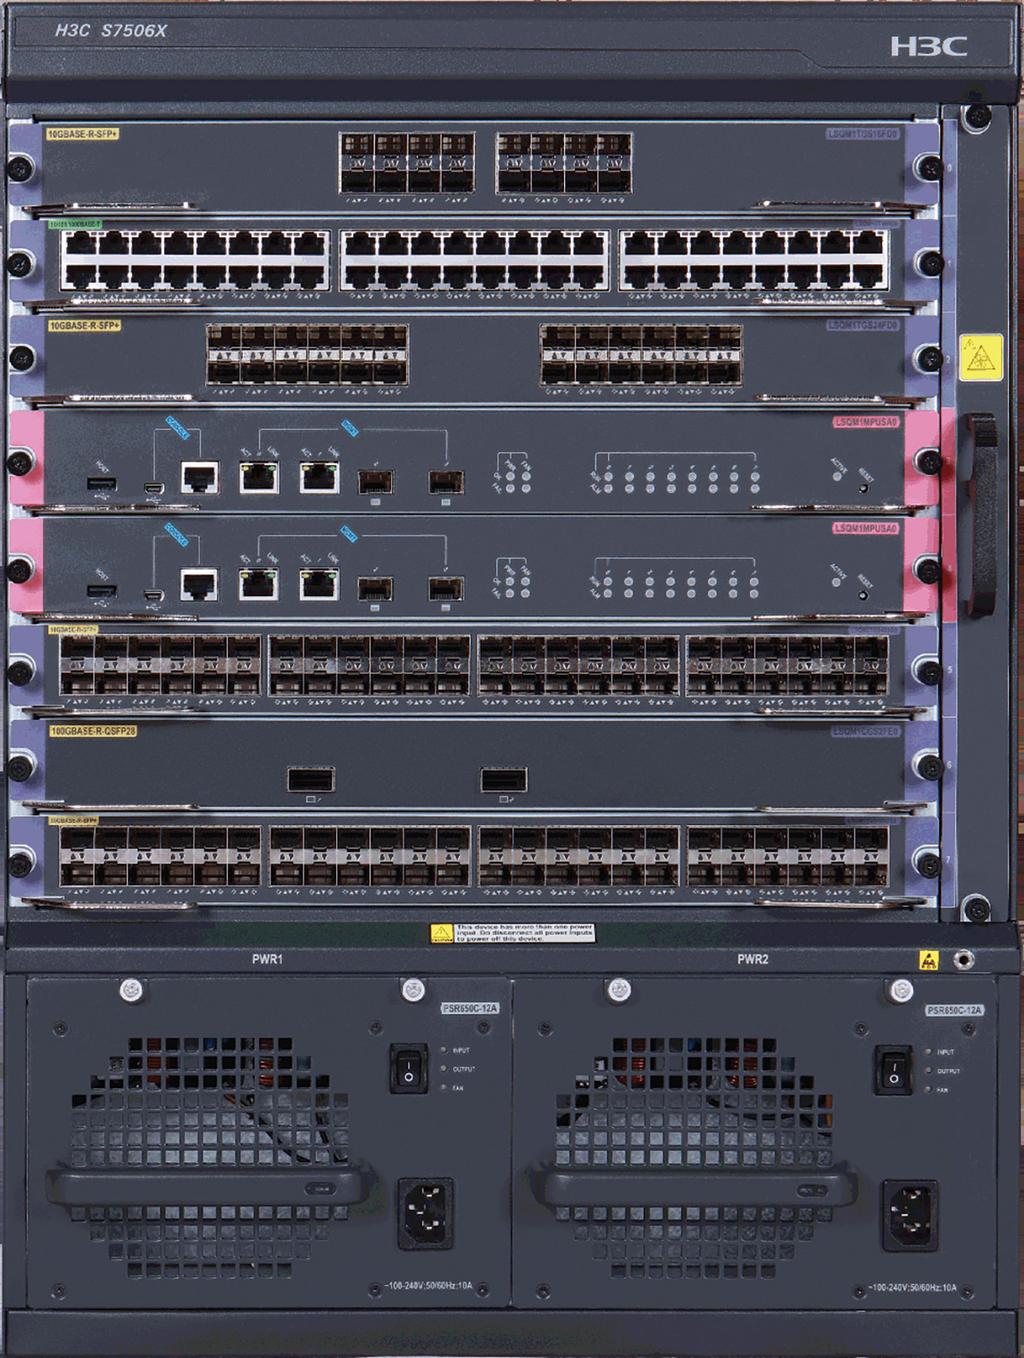 Convergence of MPLS, VPN, and multiple services MP-BGP based EVPN solution The switch series includes S7503X, S7506X and S7510X, meeting the need of different port density and performance